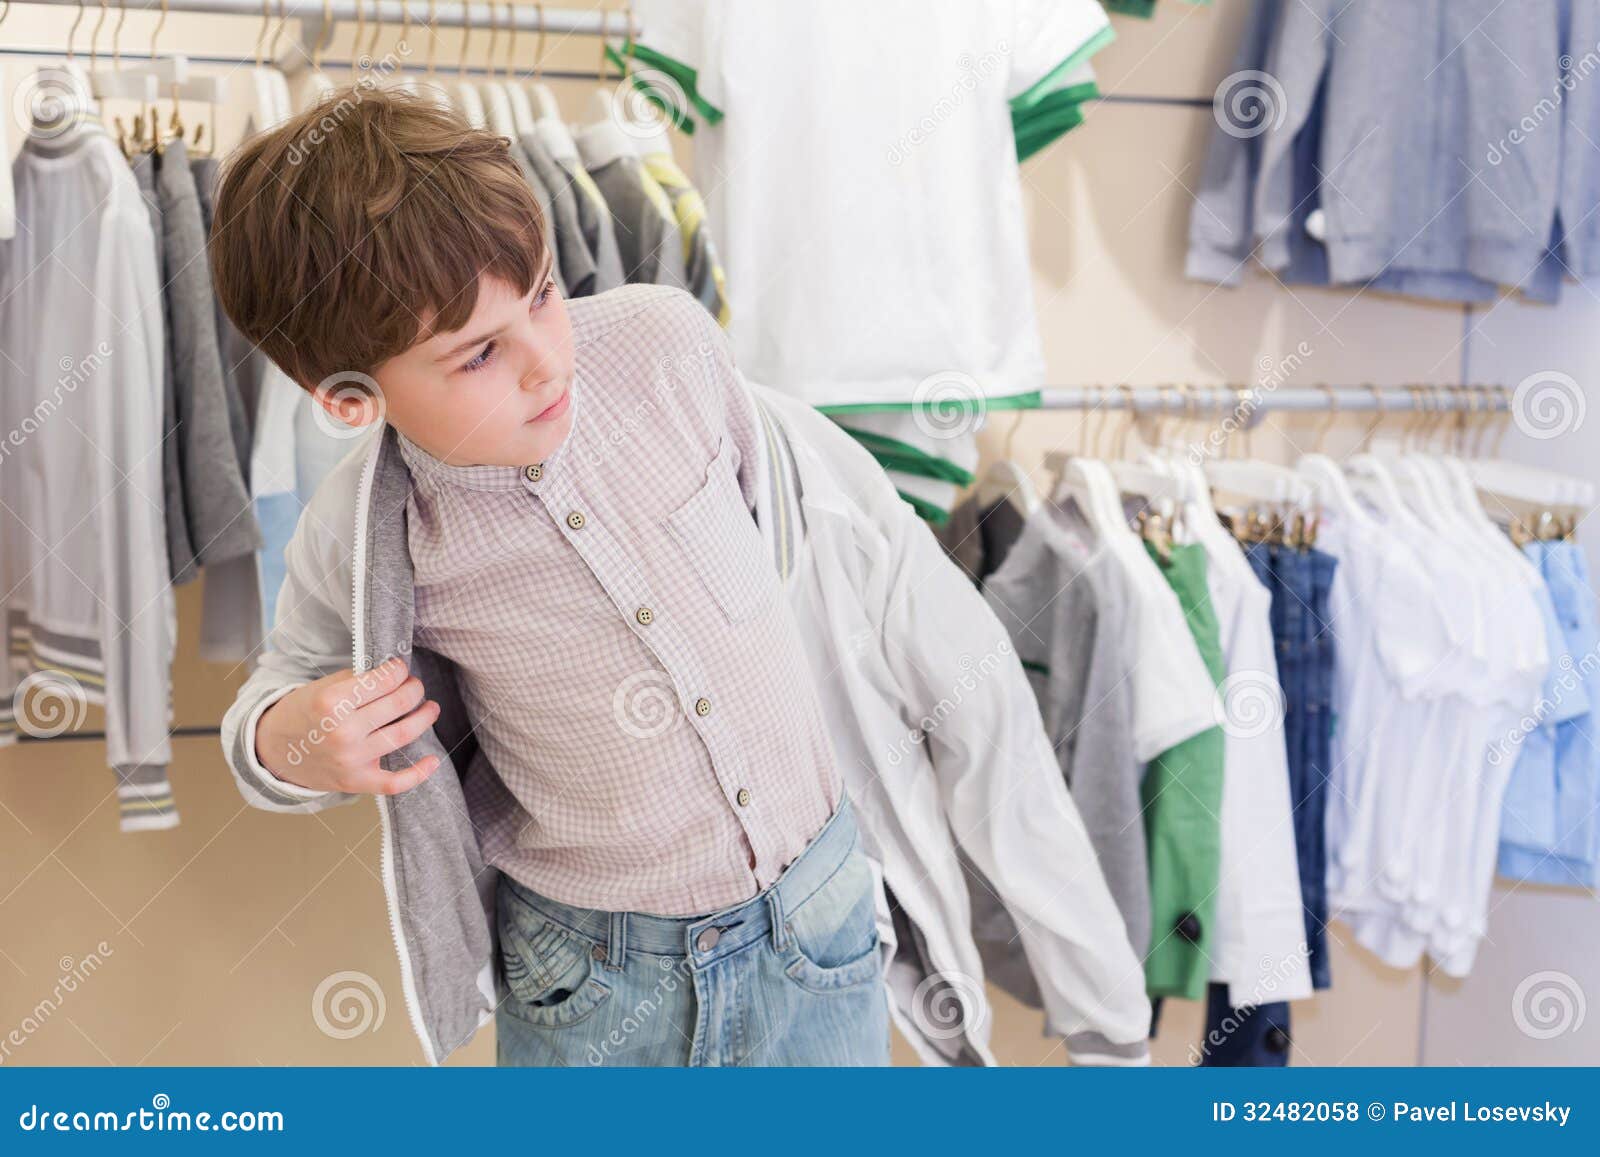 The Boy Tries on Clothes in Store Stock Photo - Image of sale, shopper ...